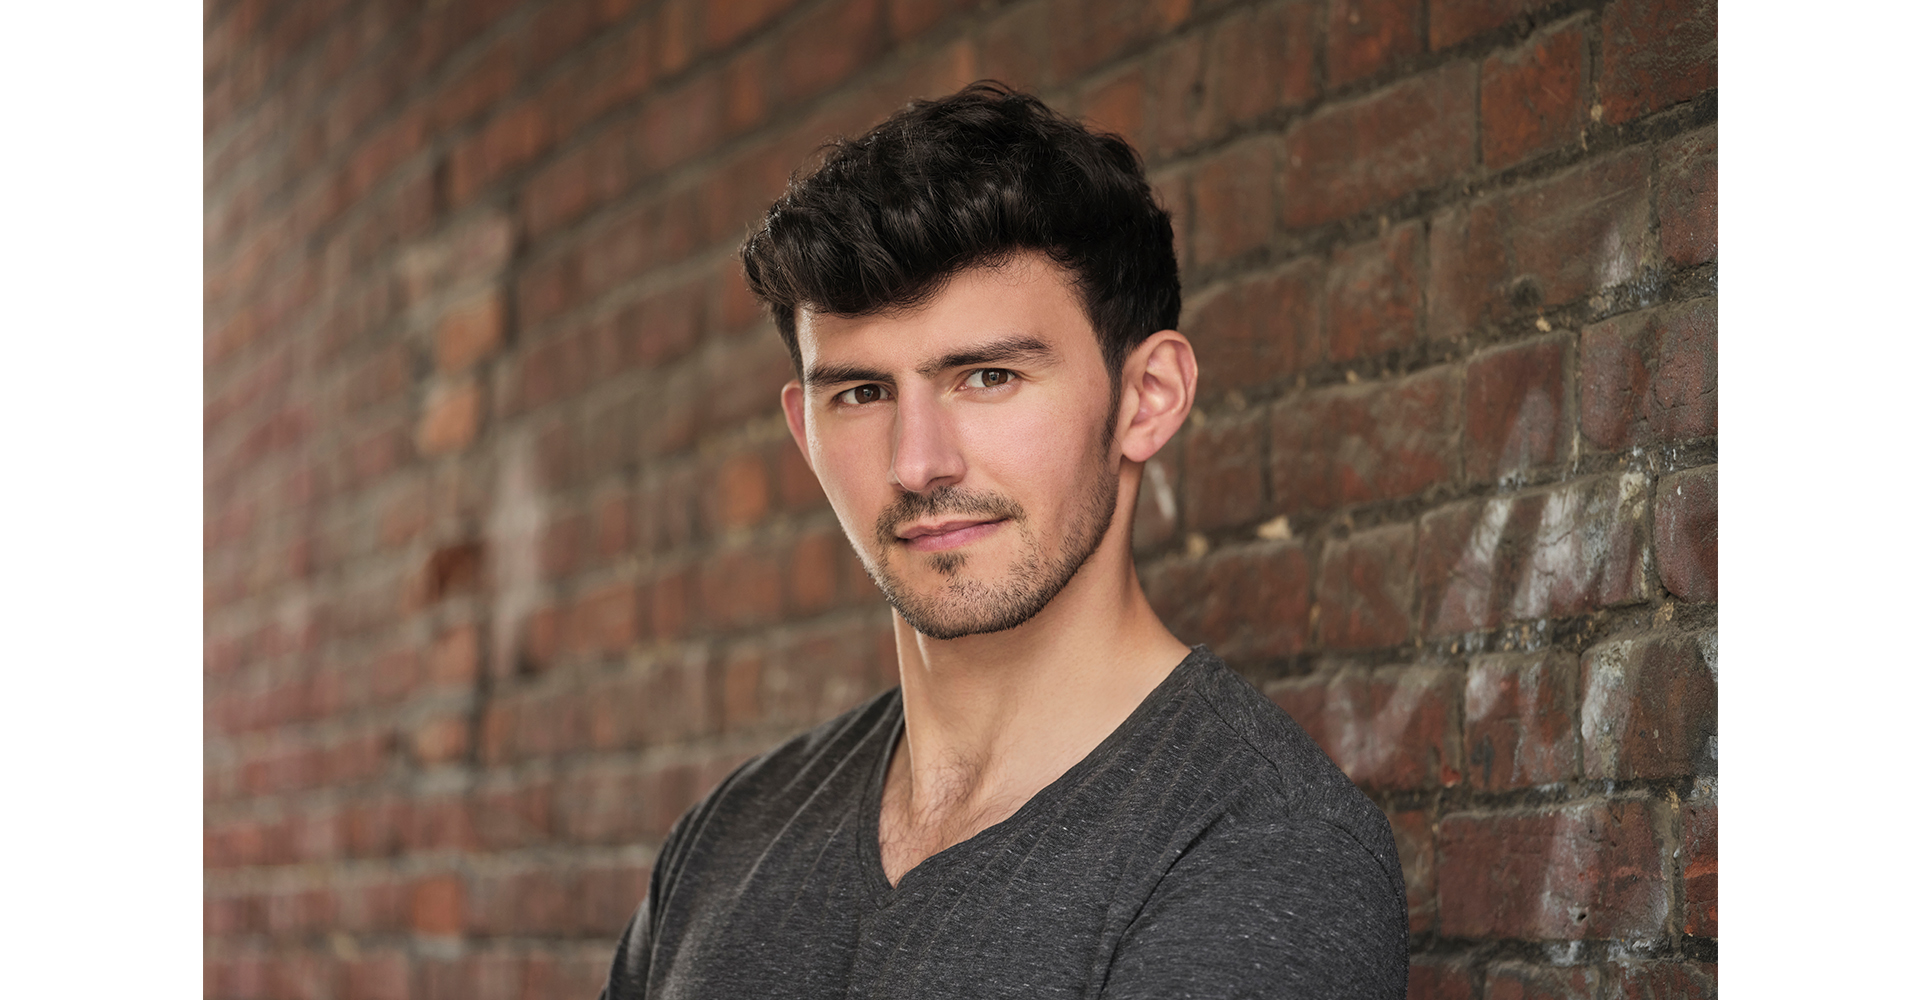 actor standing front brick wall in a grey top actor head shot natural light